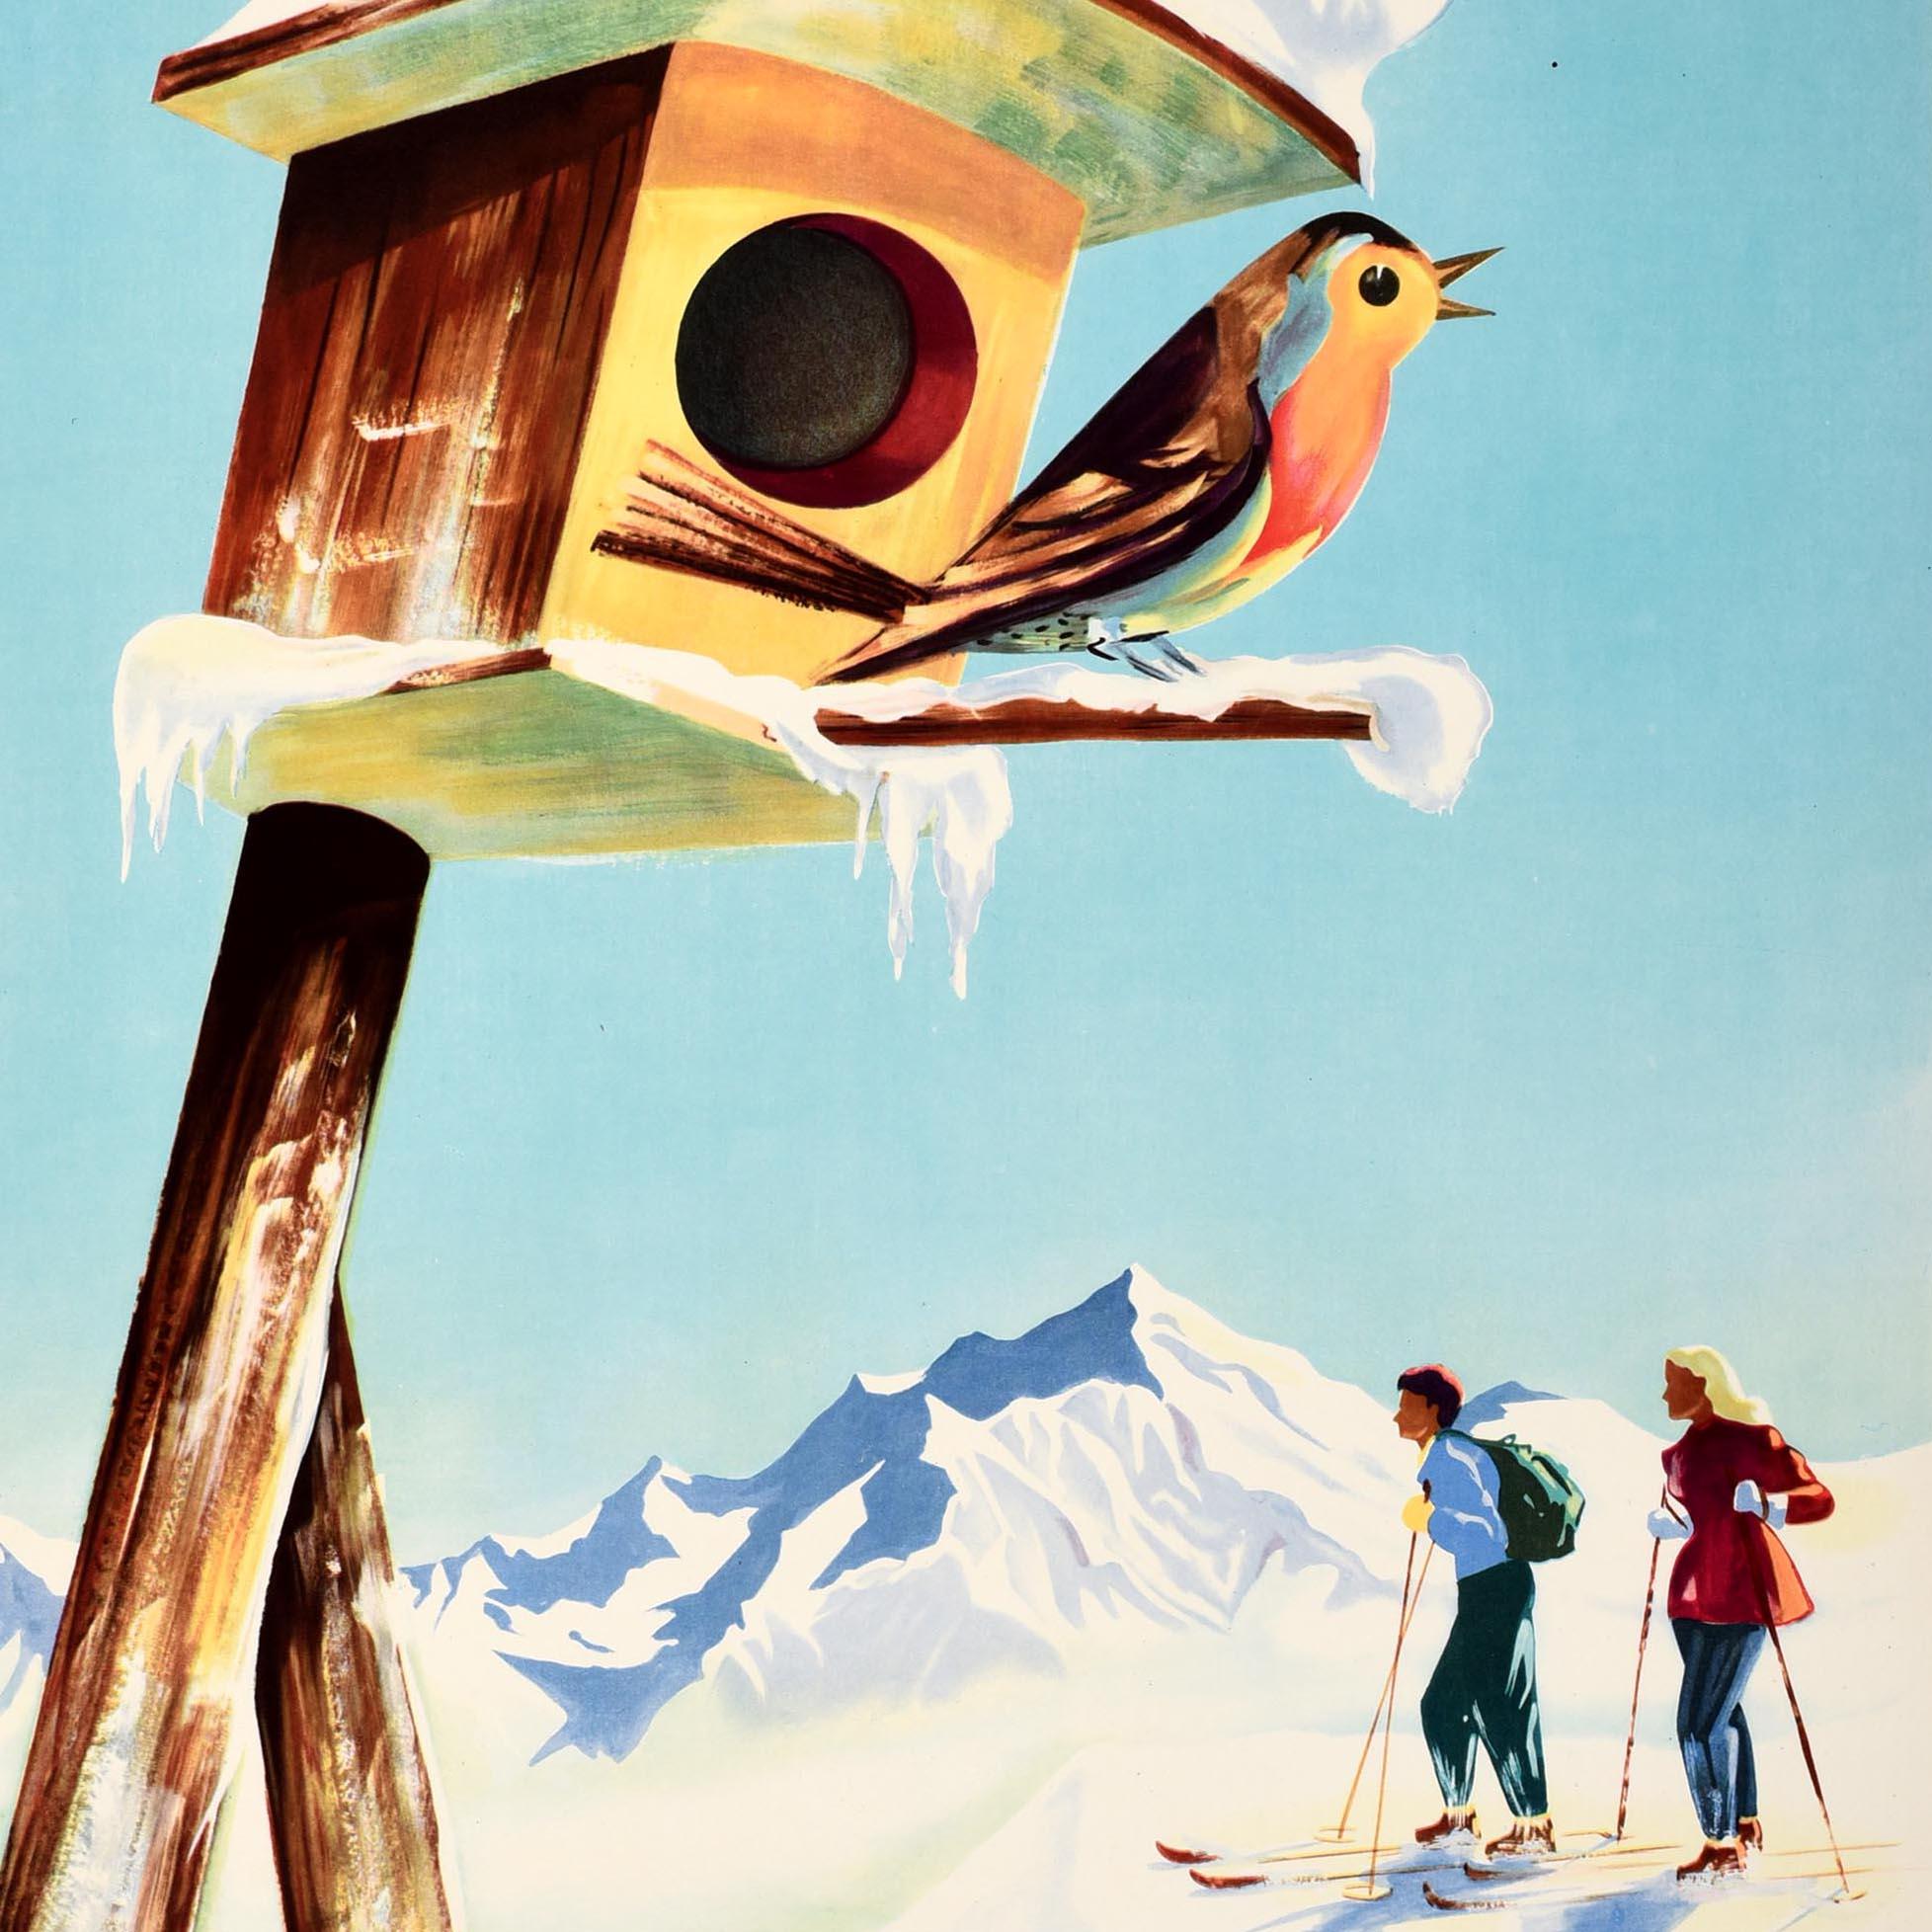 Original vintage skiing poster advertising Winter Sports in France / Wintersport in Frankreich - featuring a great design depicting a couple on skis enjoying the view of the snowy mountains below the blue sky background, a robin redbreast bird on a